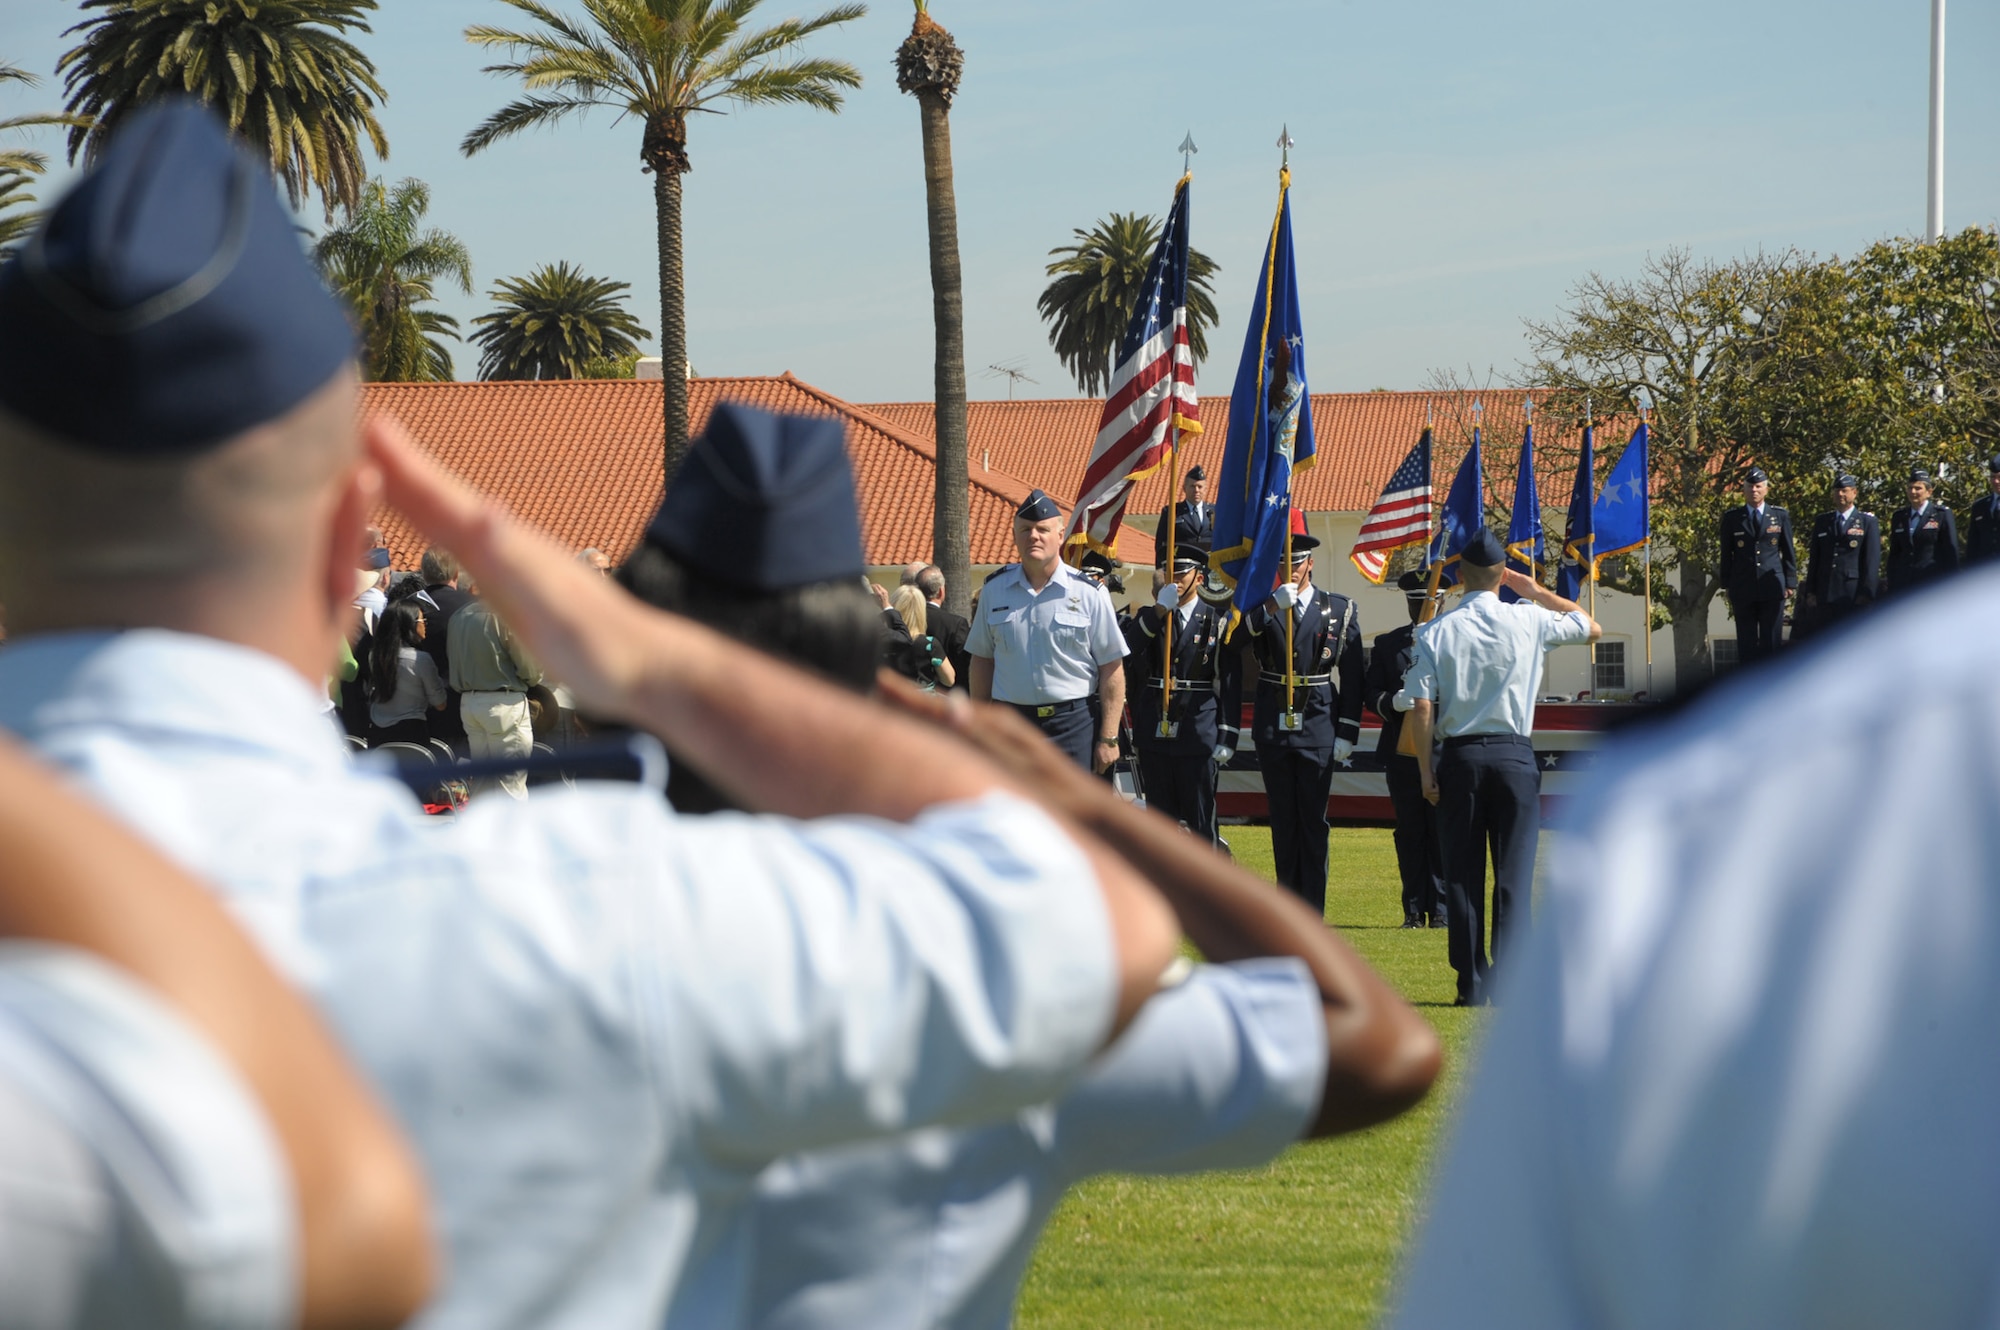 Airmen standing in formation salute the flag during the SMC change of command ceremony, June 3. Lieutenant Gen. Ellen Pawlikowski assumed command from Lt. Gen. Tom Sheridan at a ceremony officiated by Gen. William Shelton, Air Force Space Command commander, and attended by more than 500 family, friends, community leaders and SMC personnel. (Photo by Joe Juarez)